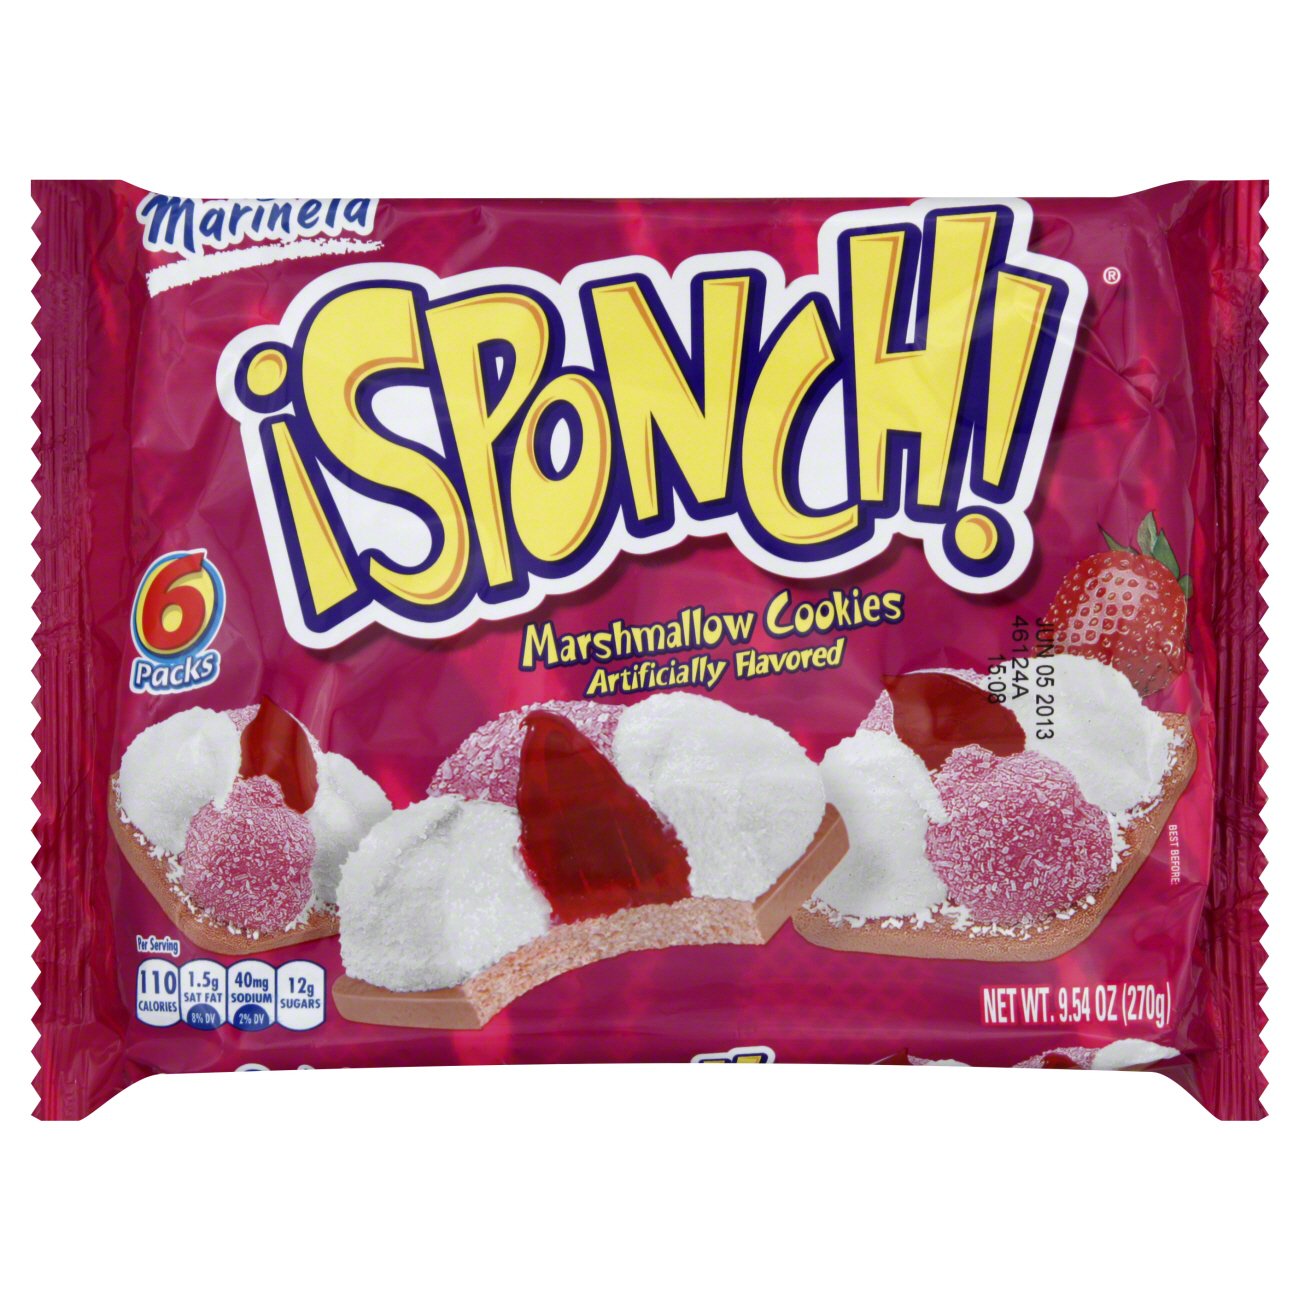 Marinela Sponch Marshmallow Cookies Shop Cookies At H E B 7737